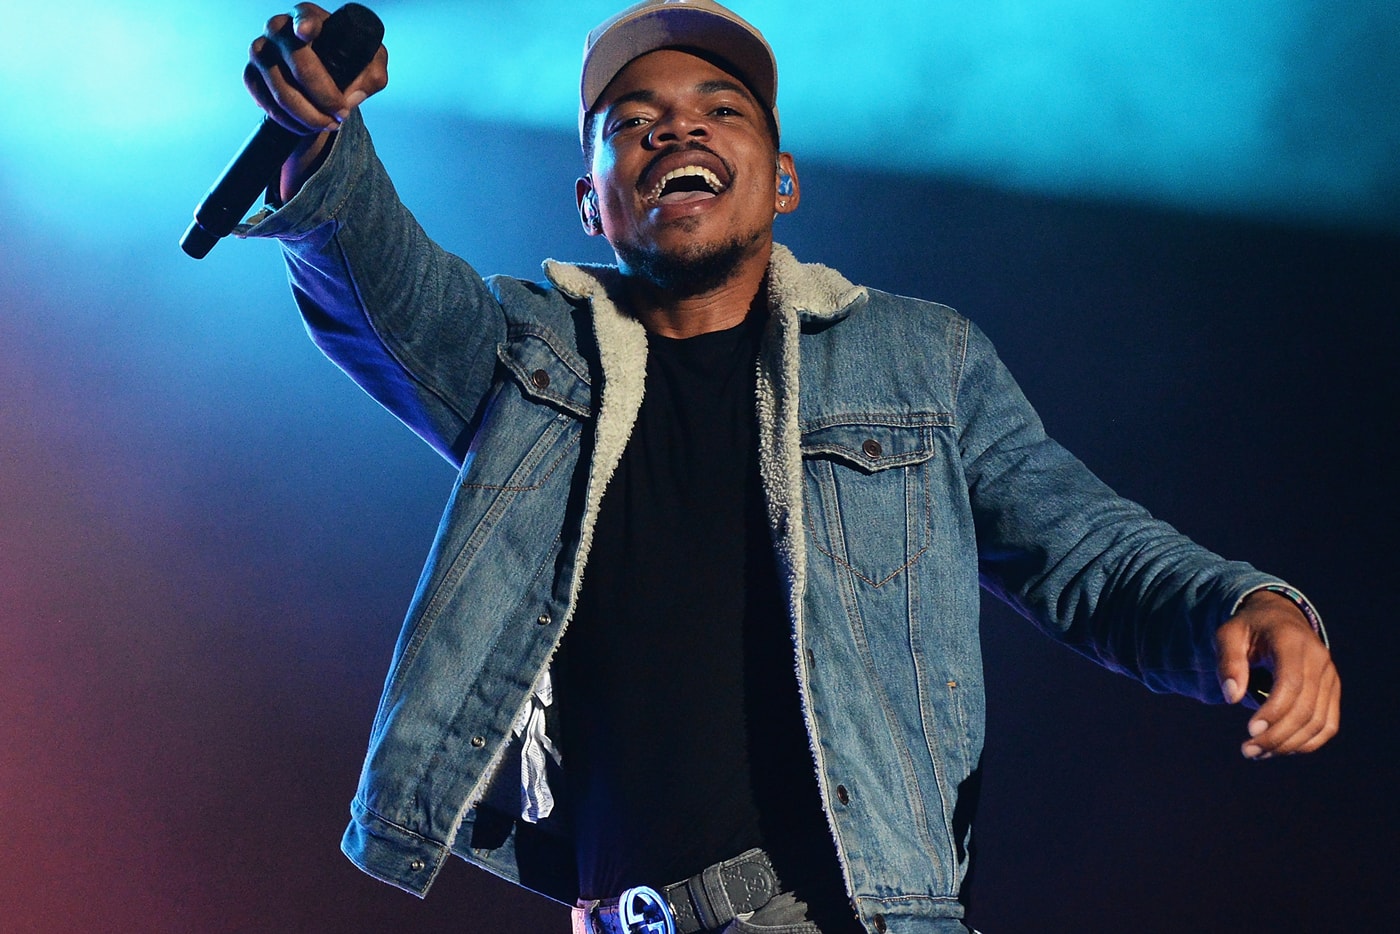 Chance The Rapper 2017 Grammy Awards